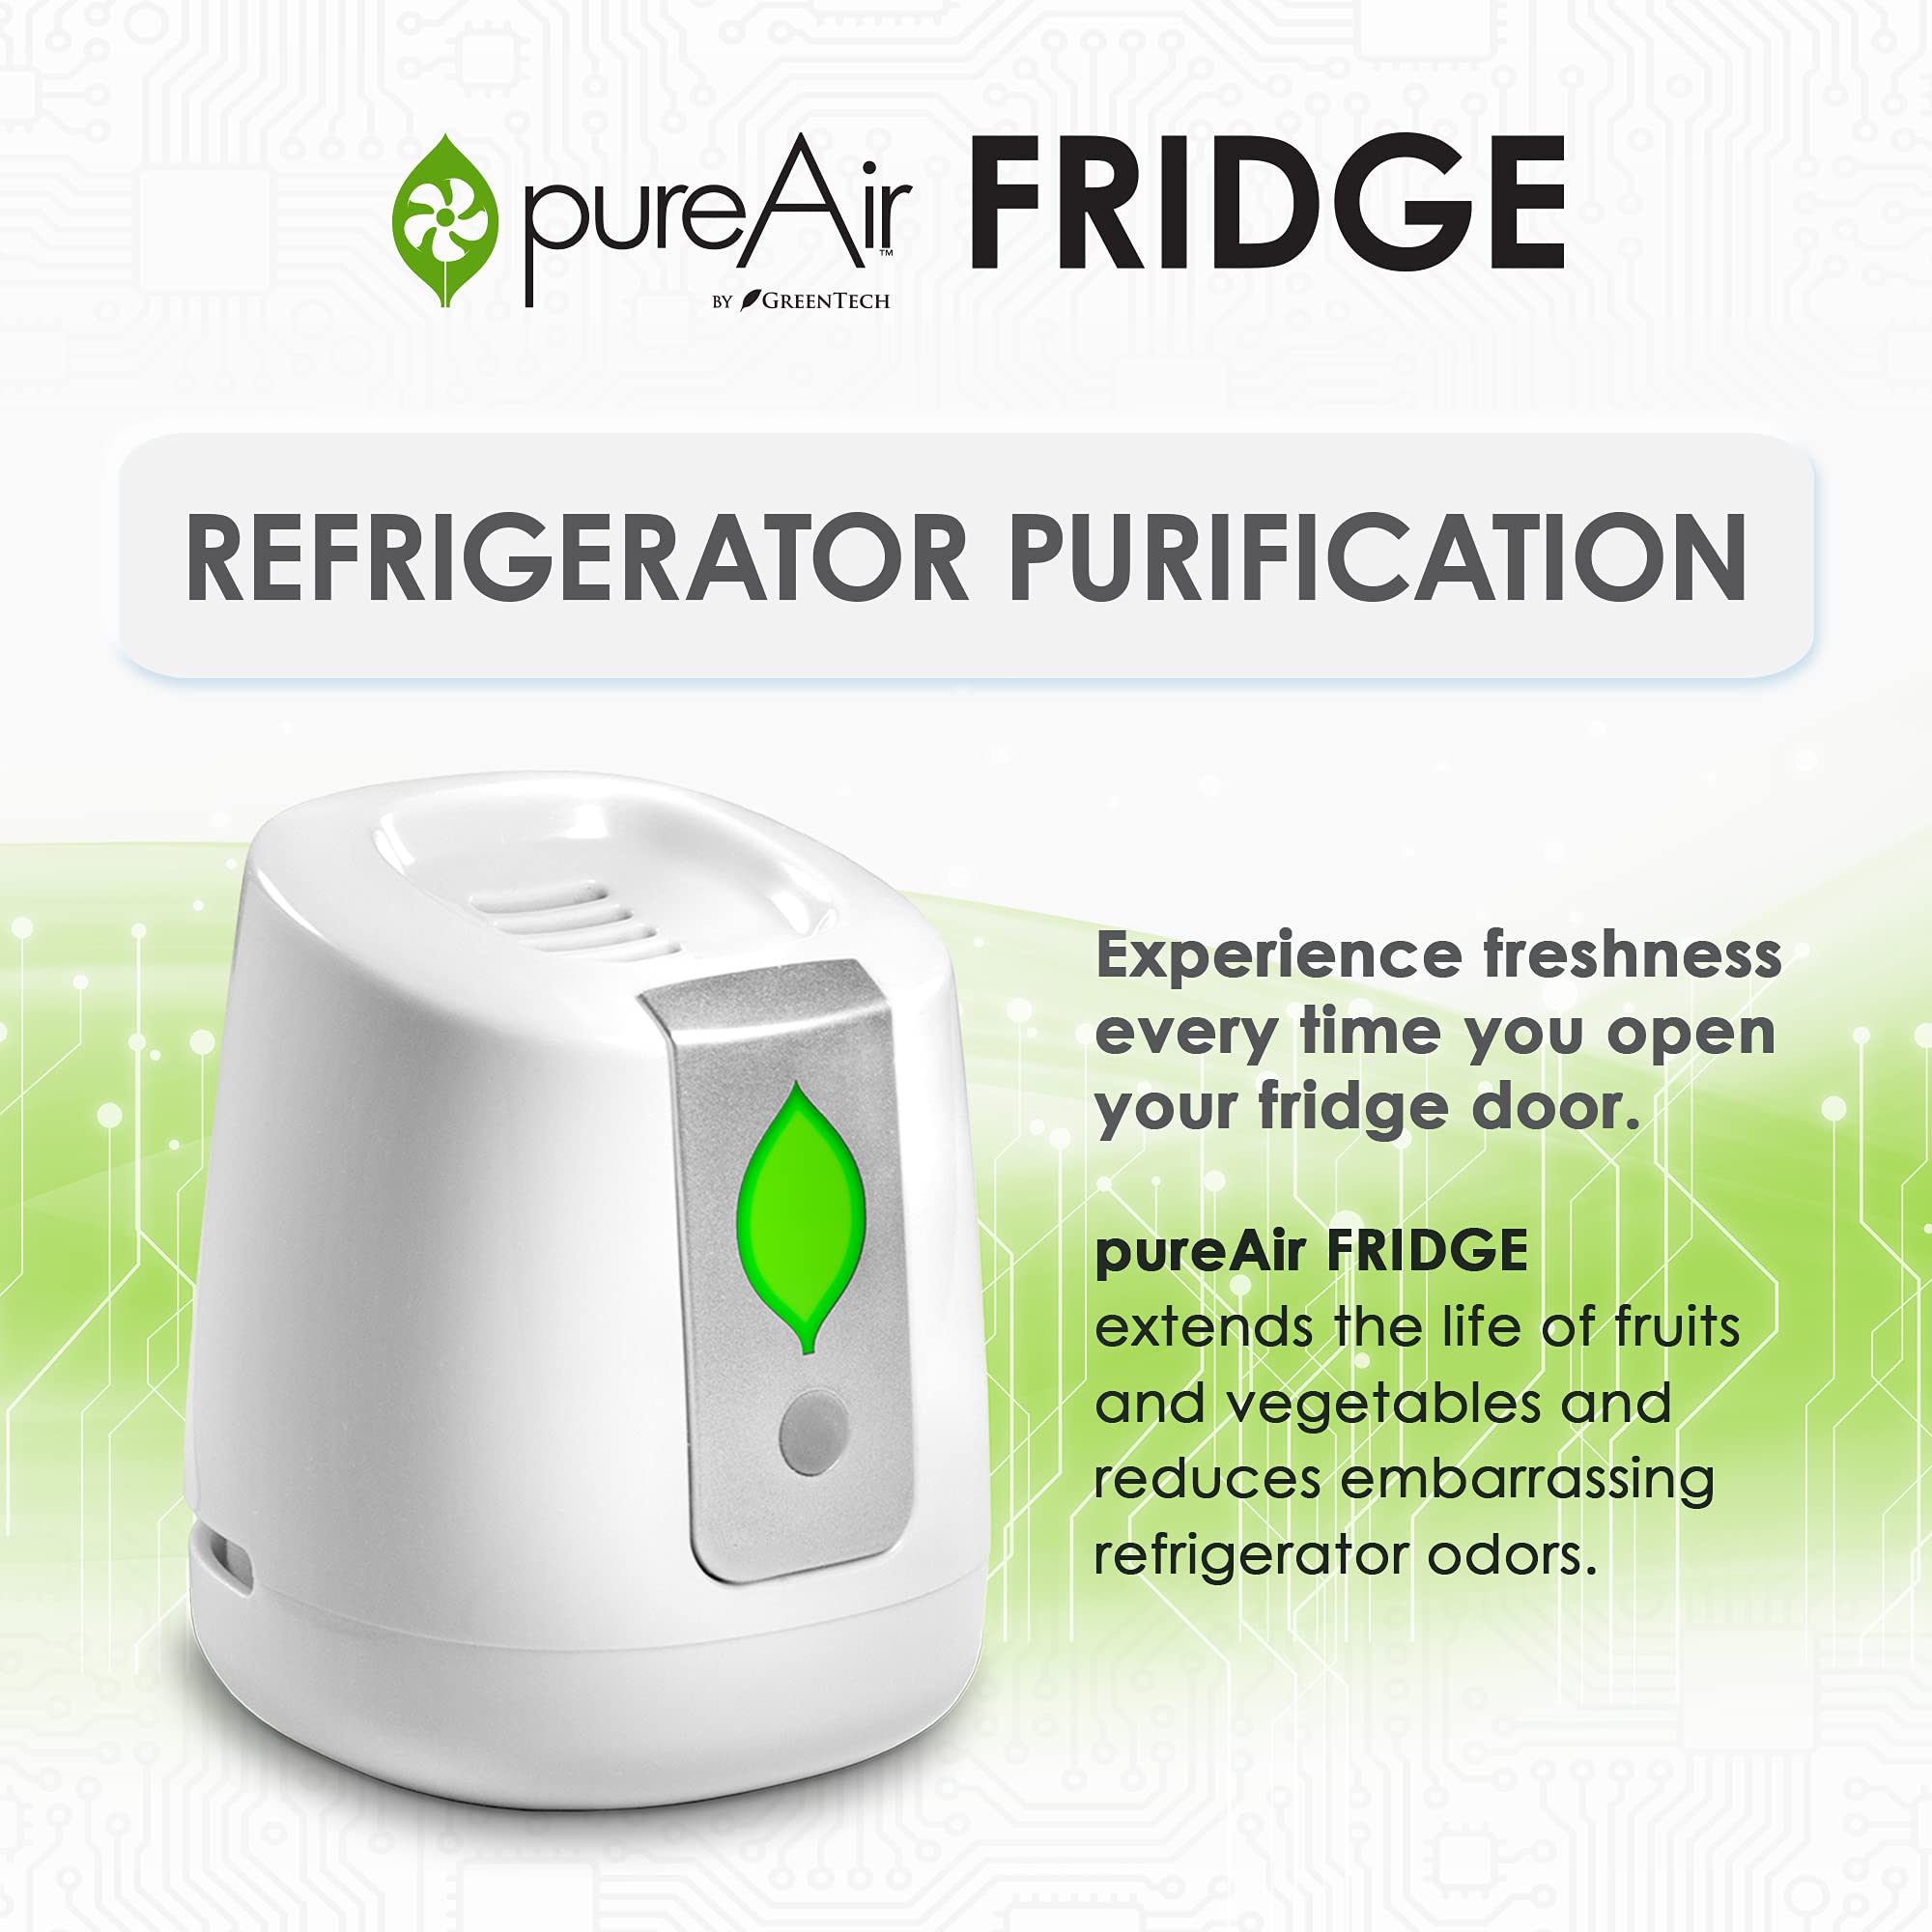 GreenTech Environmental pureAir FRIDGE - Food Shelf Life Extender, Odor Eliminator and Purifier - 24 Days Purification - Air Filter for Mini, Small & Large Refrigerator - Compact and Easy to Use